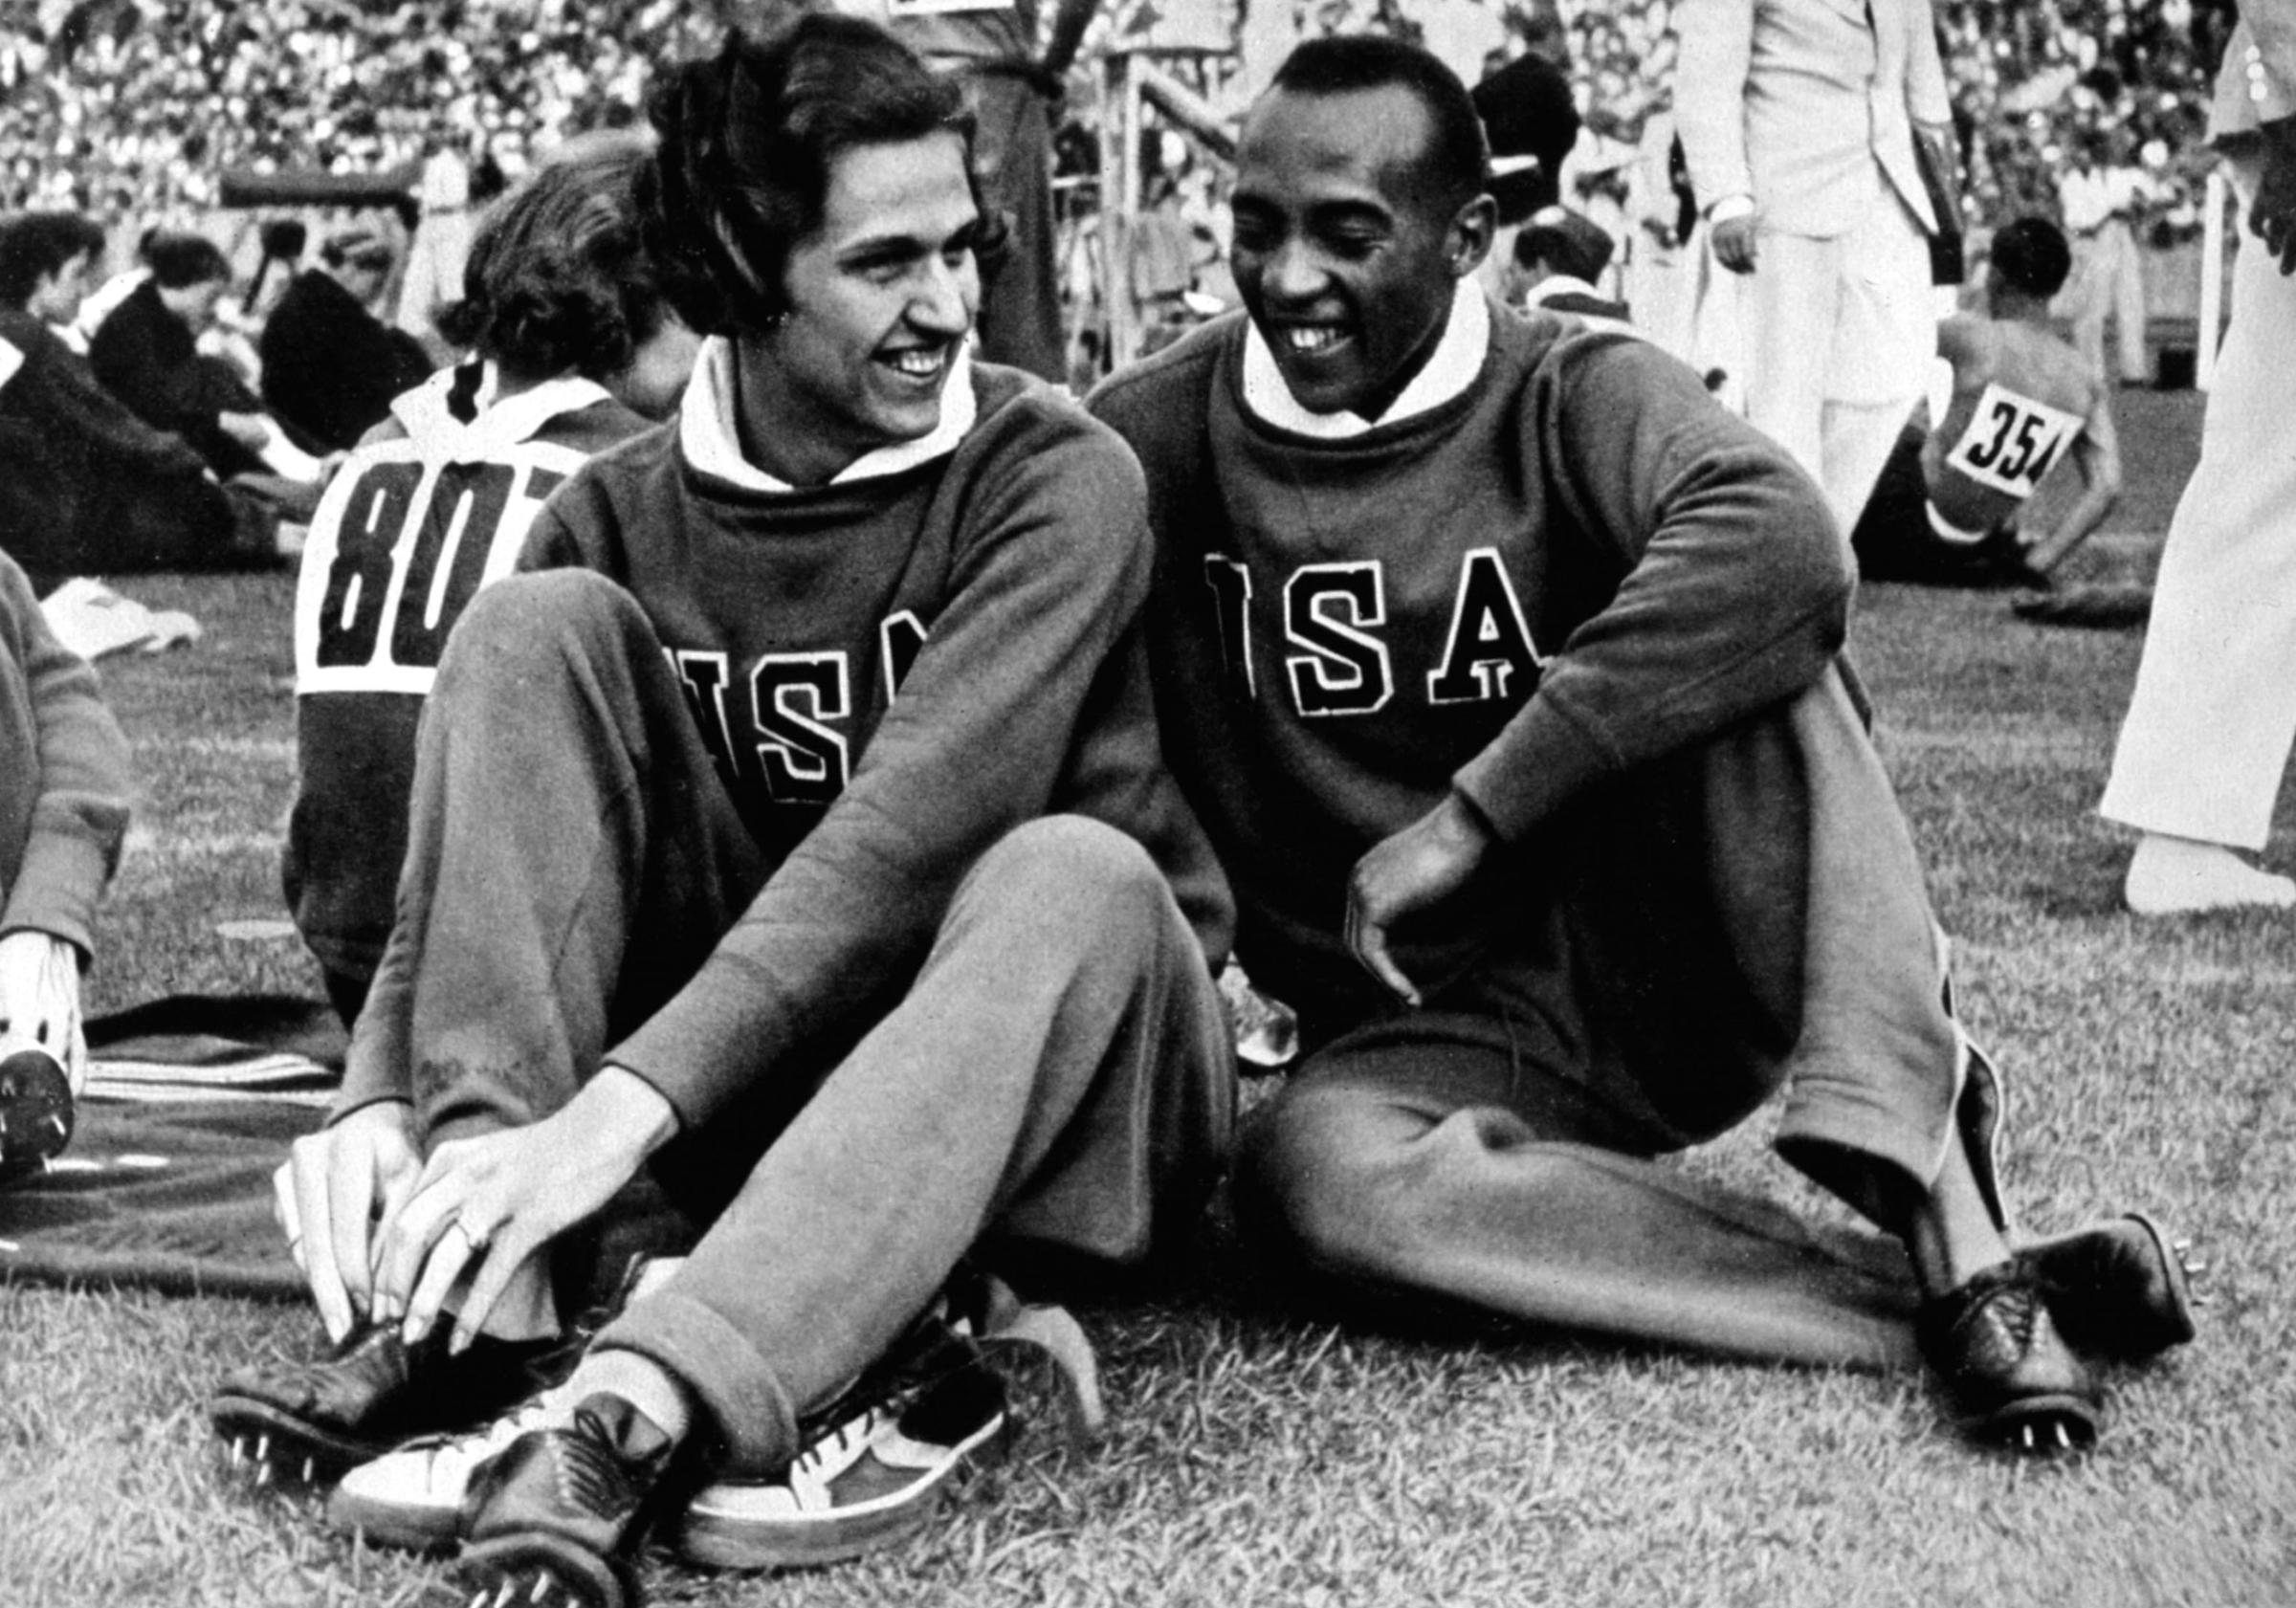 Berlin Olympic Games, Jesse Owens and Helen Stephens, 1936, Germany.